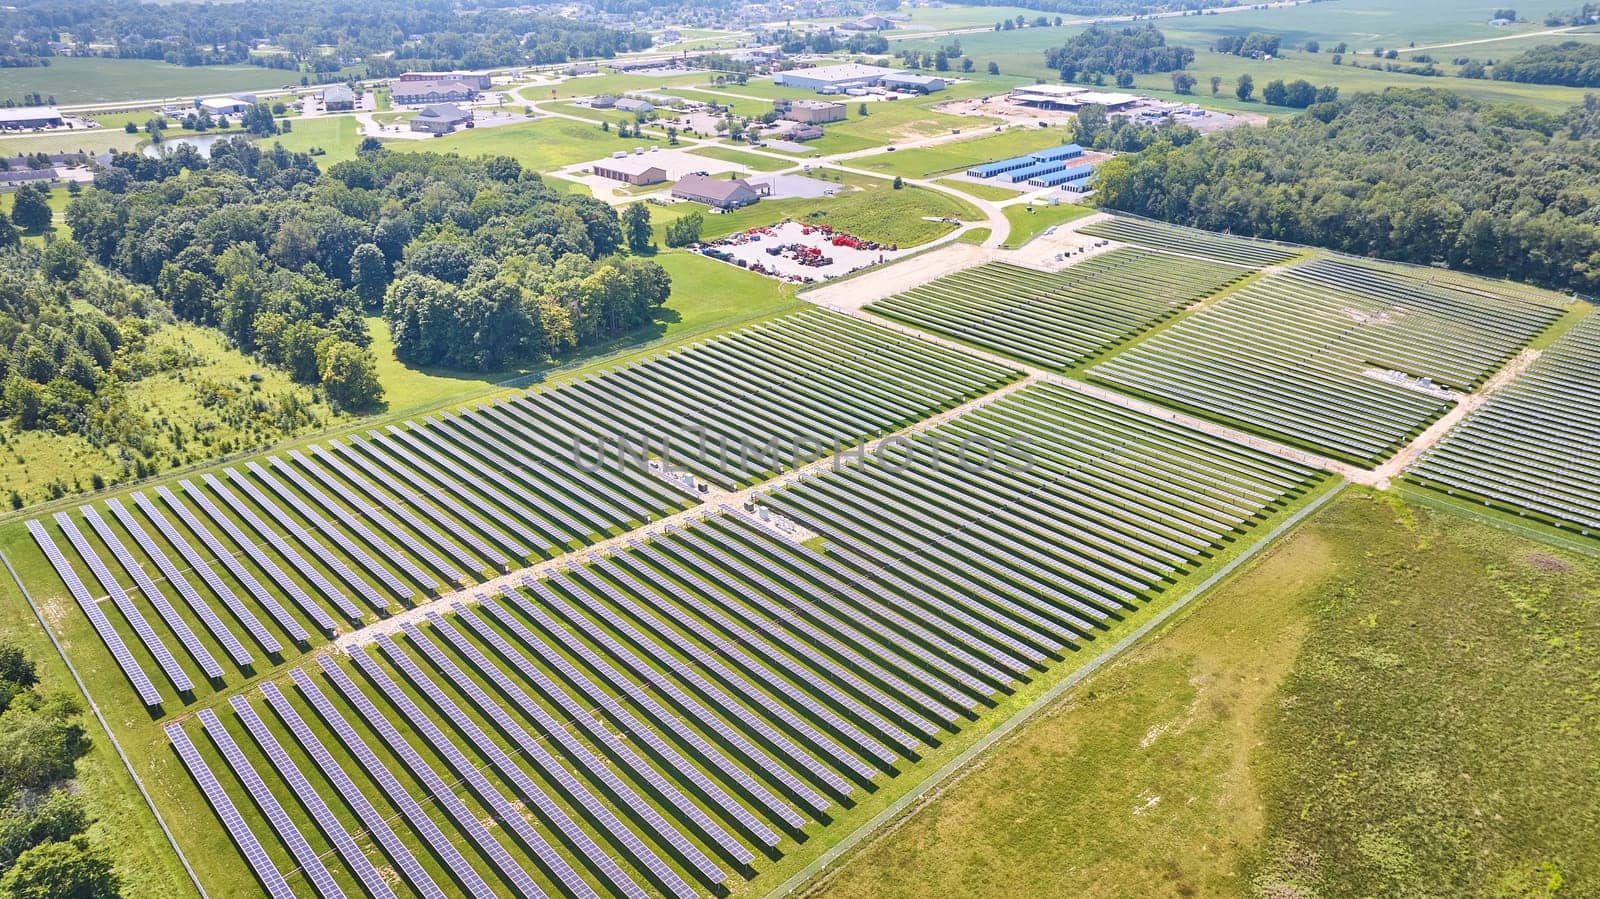 Image of High up view of solar farm in grassy field on bright summer day